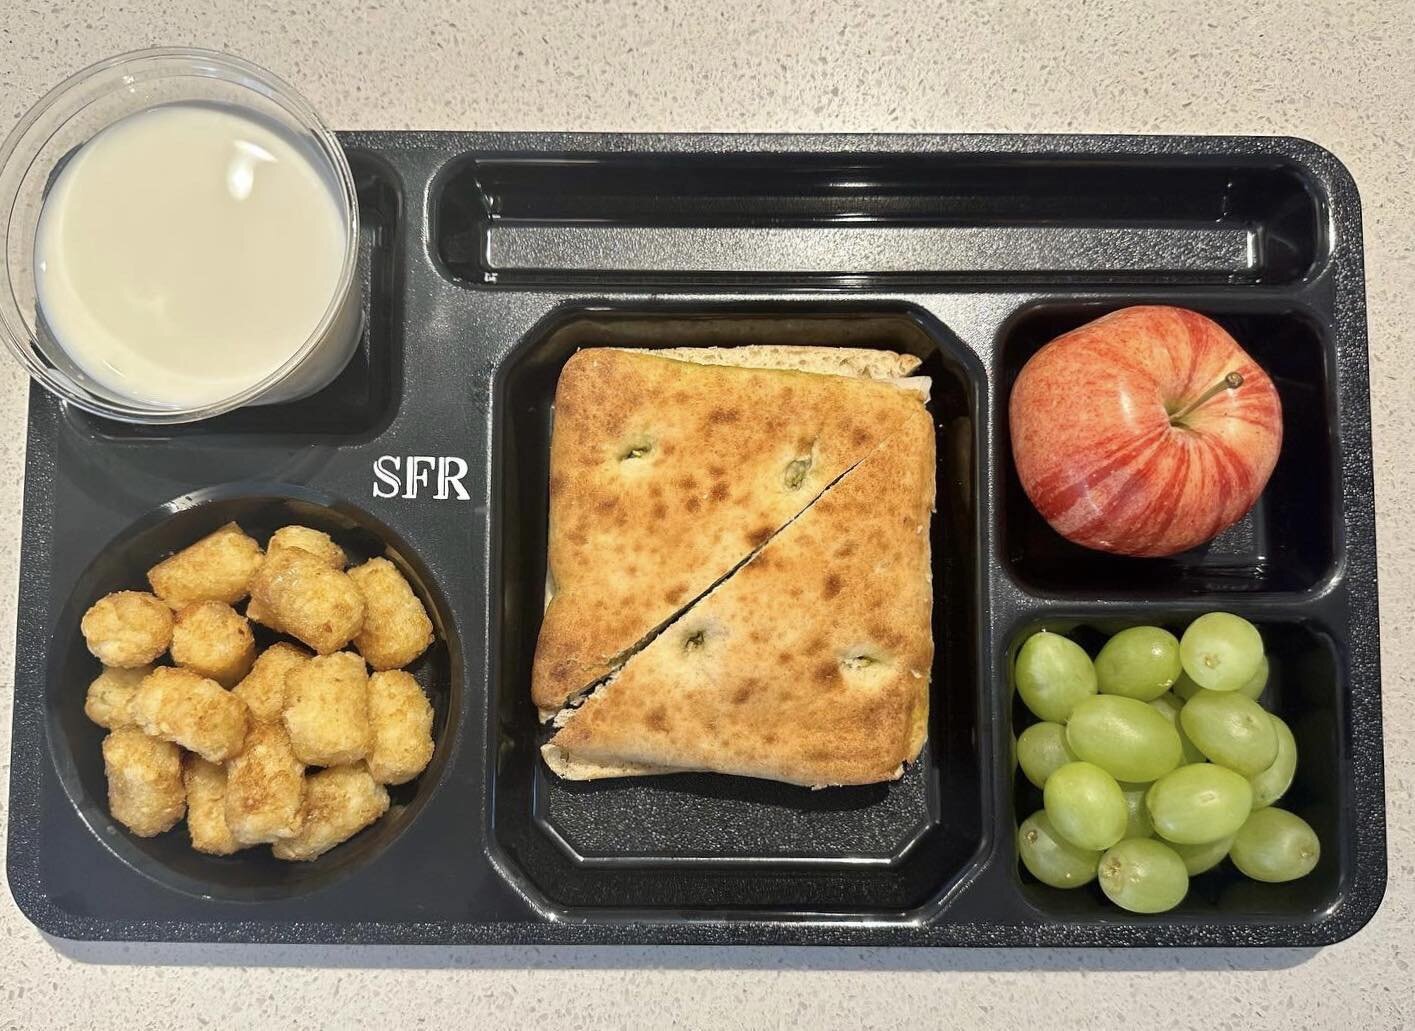 Customize your tray so that it represents your school best! ⬇️ When you purchase Plas-Tique Trays, you choose:

🍽️ Tray Size
🖤 Color 
🐶 Mascot/Logo 

To learn more about why our trays are the perfect option for your cafeteria, visit our website at